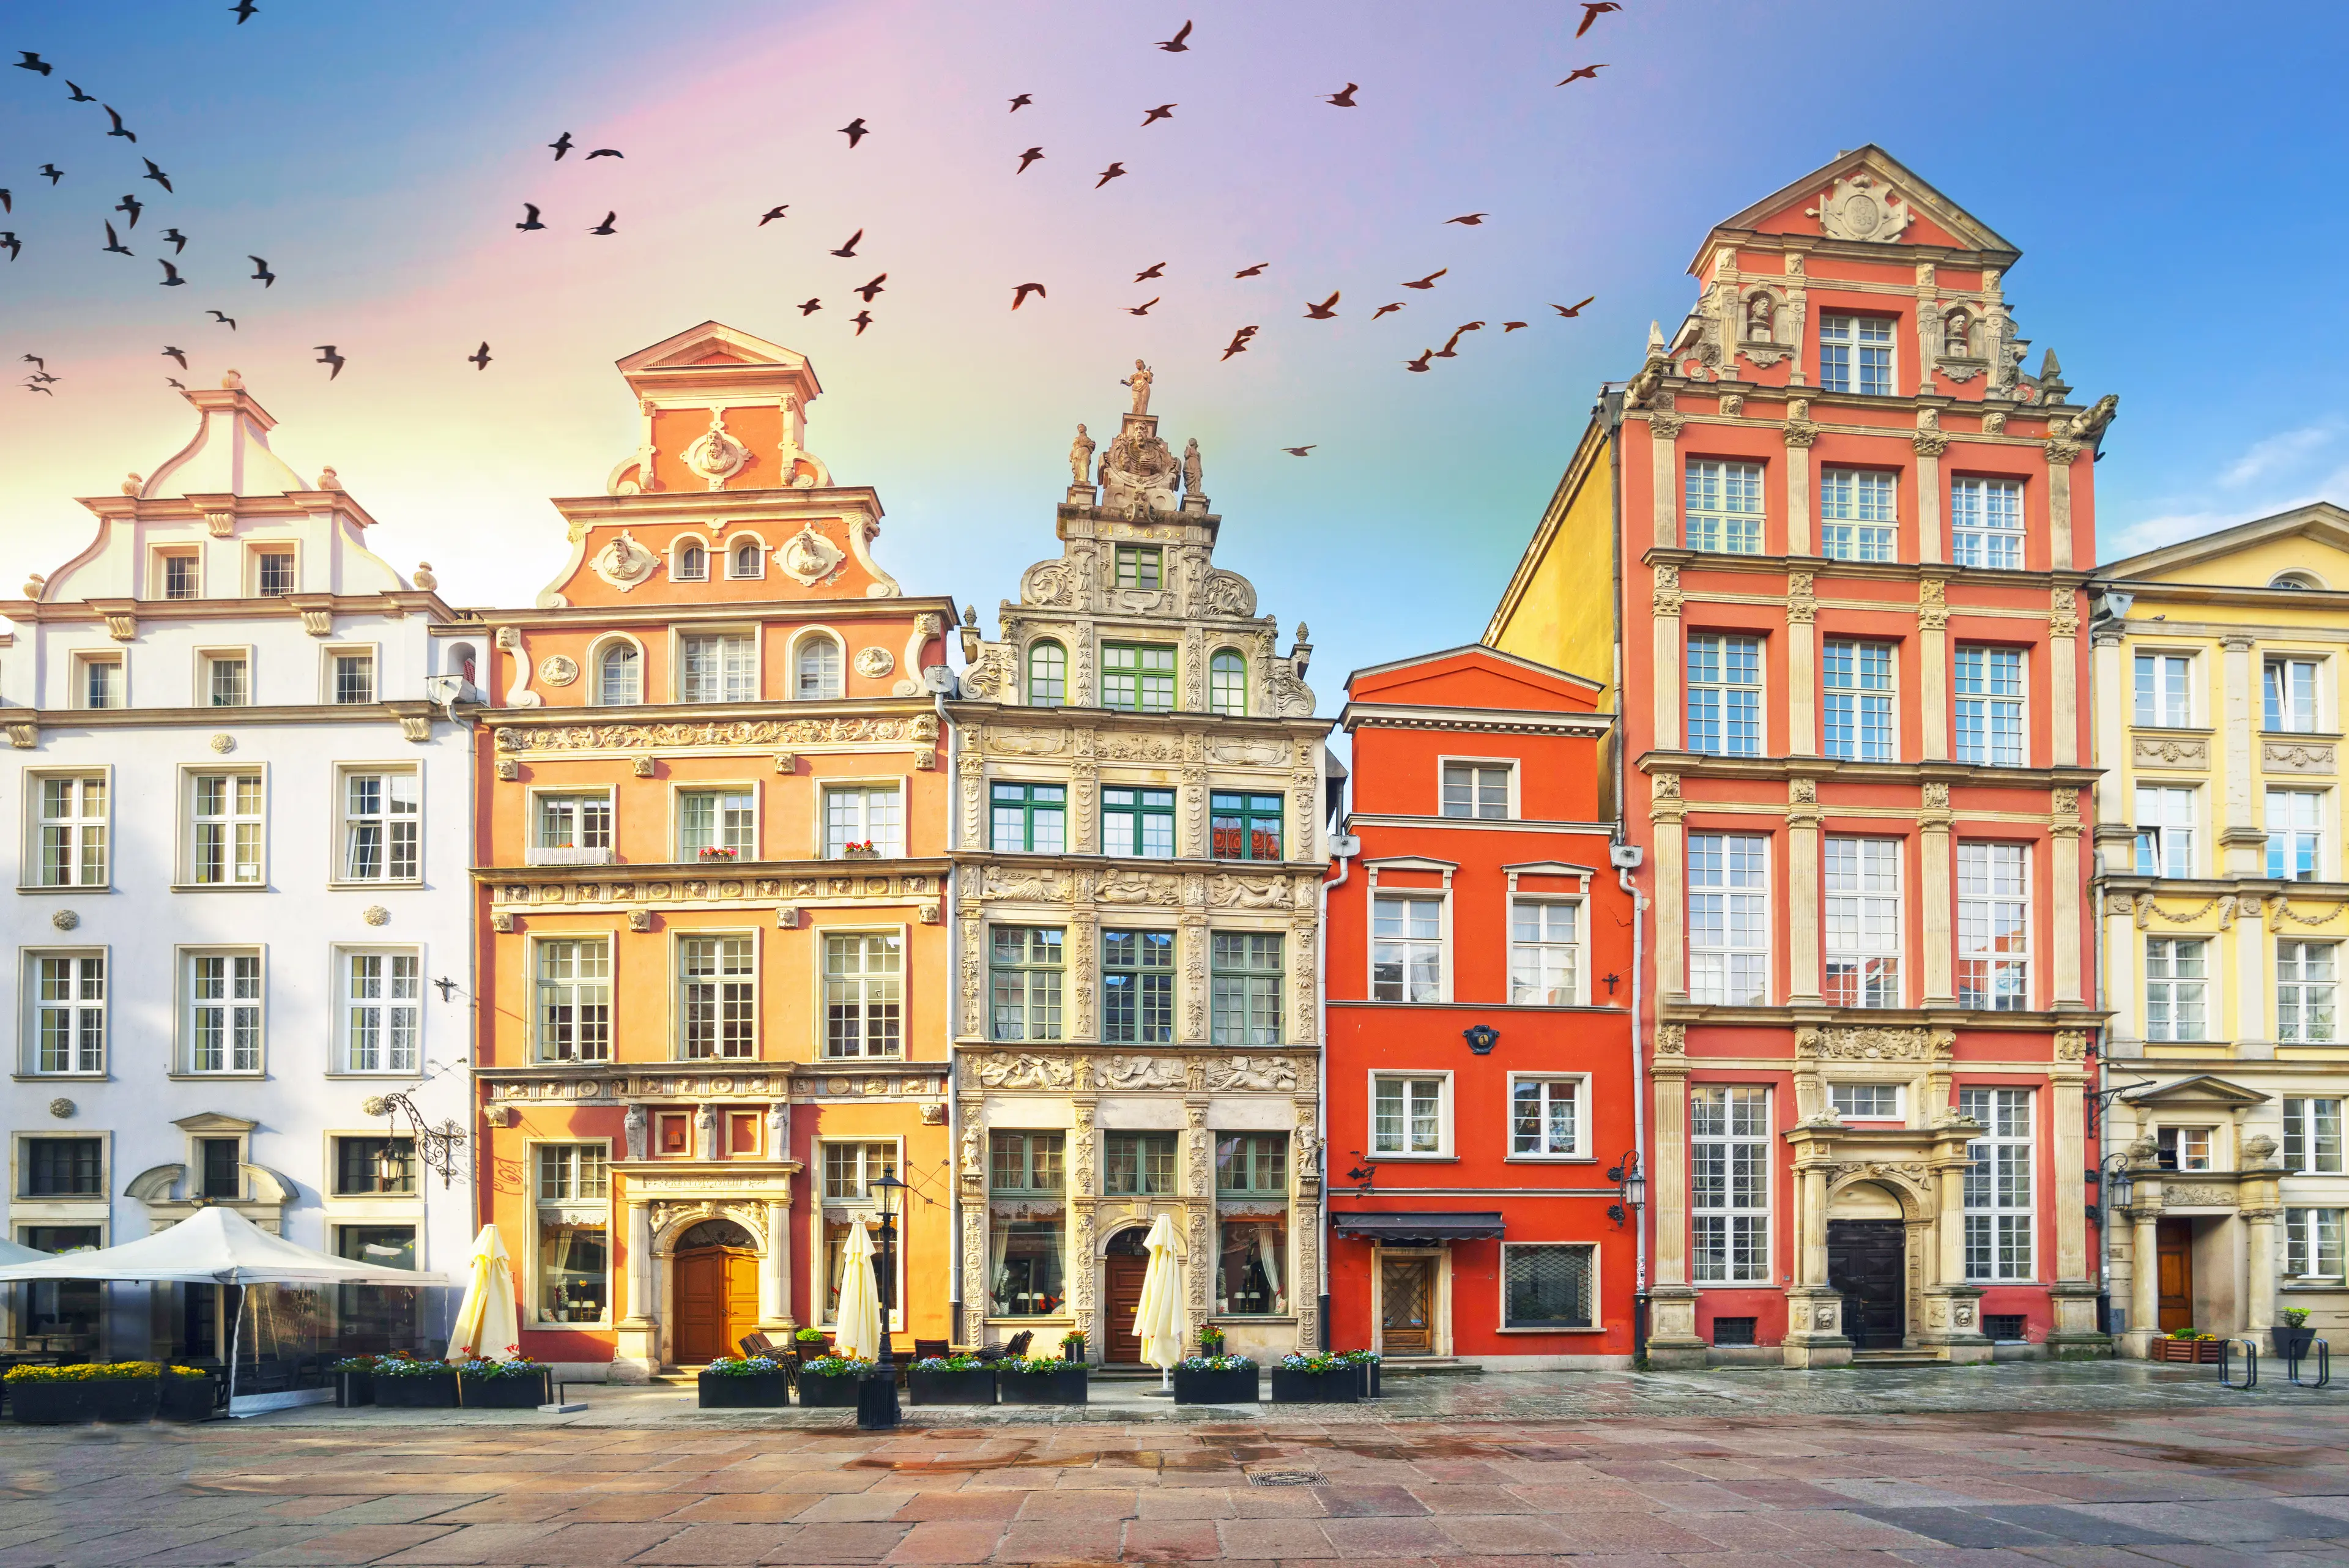 Colorful buildings of the old town